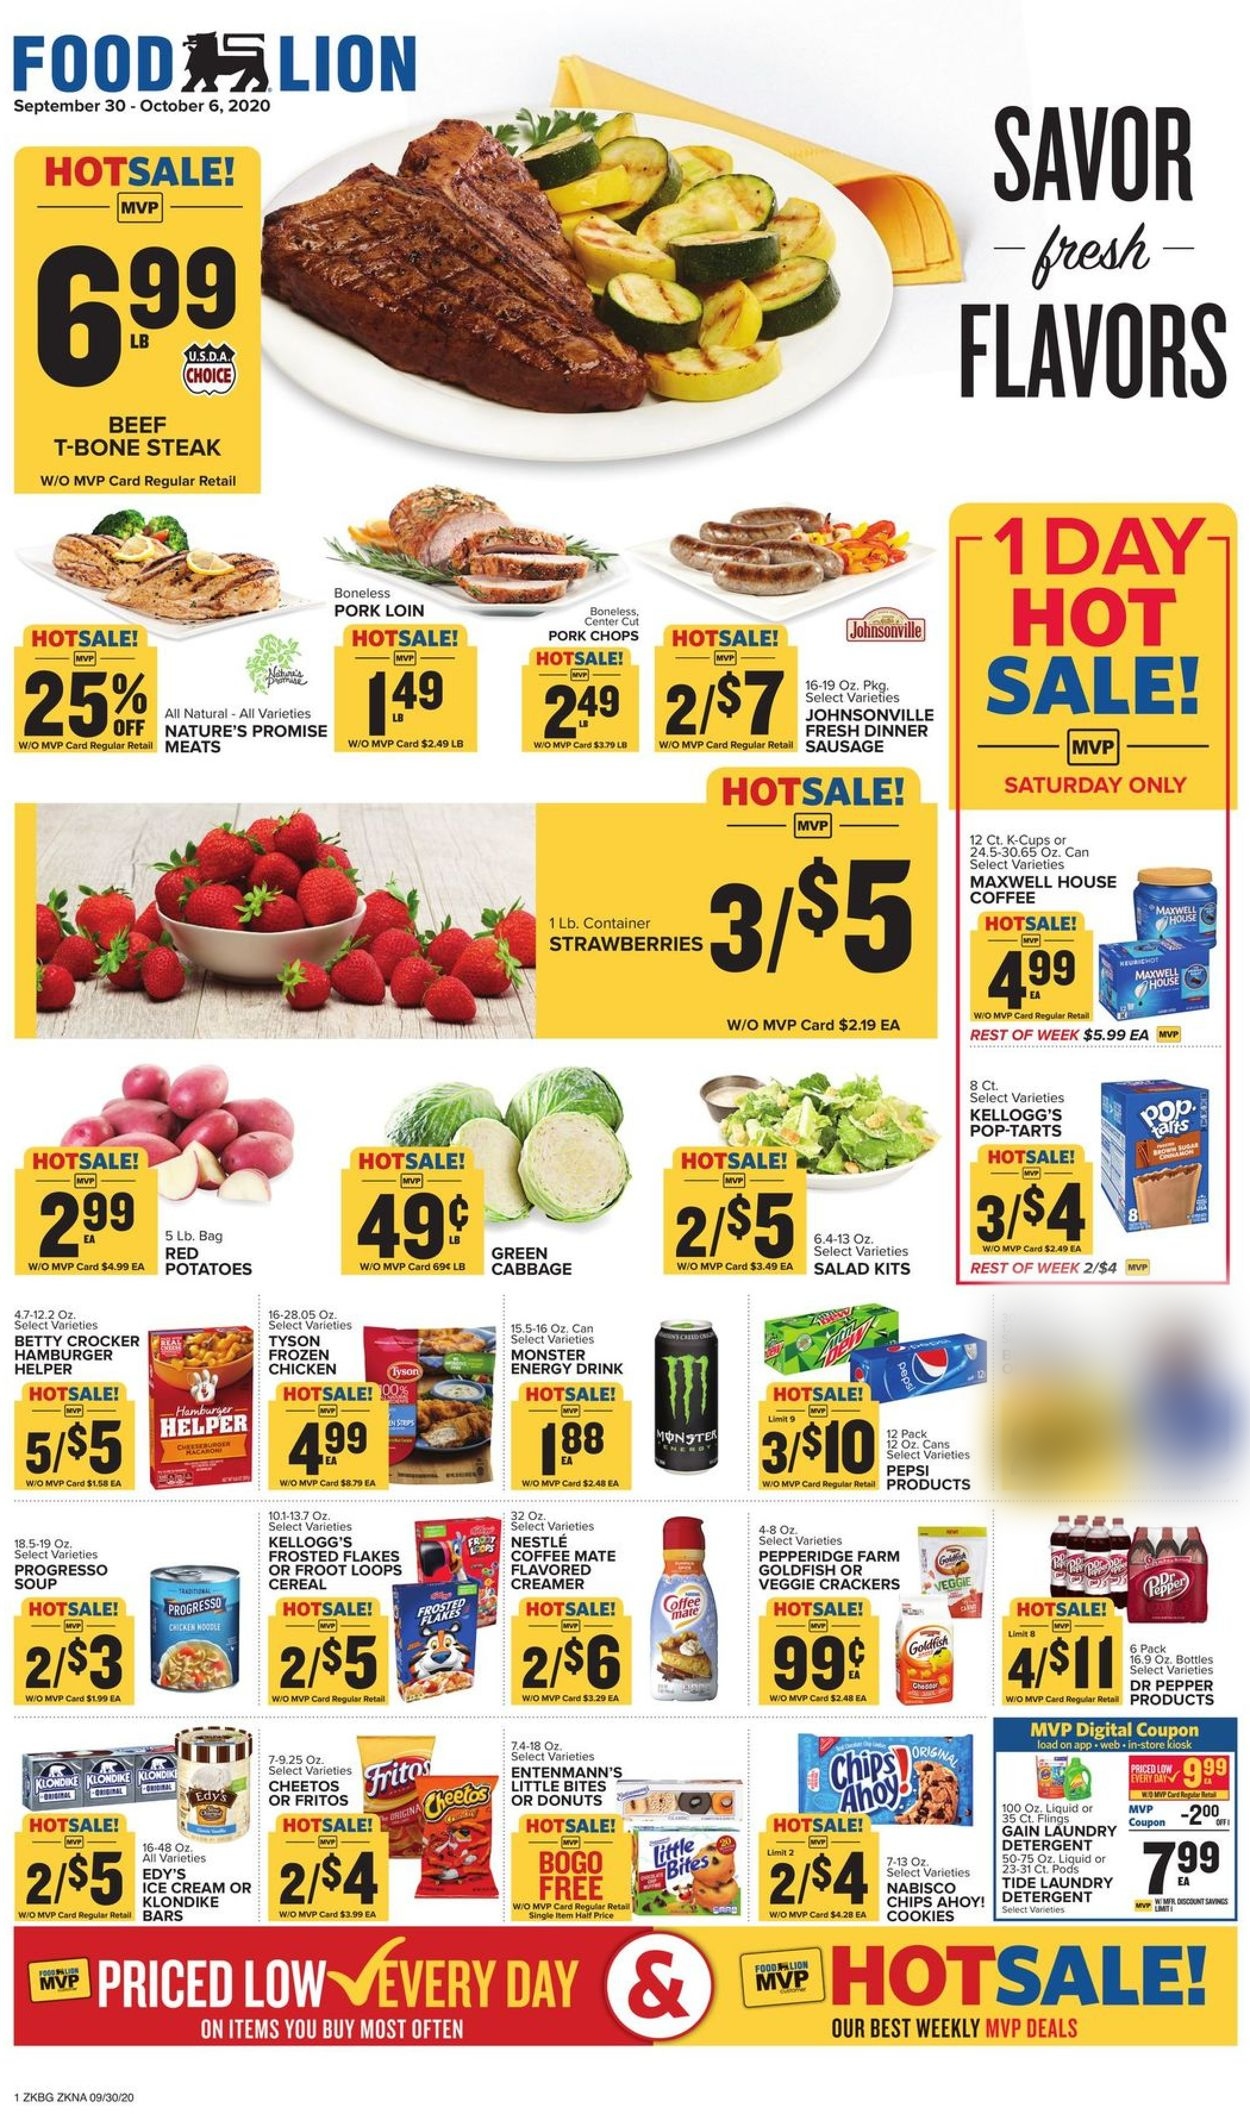 Food Lion Current weekly ad 09/30 - 10/06/2020 - frequent-ads.com